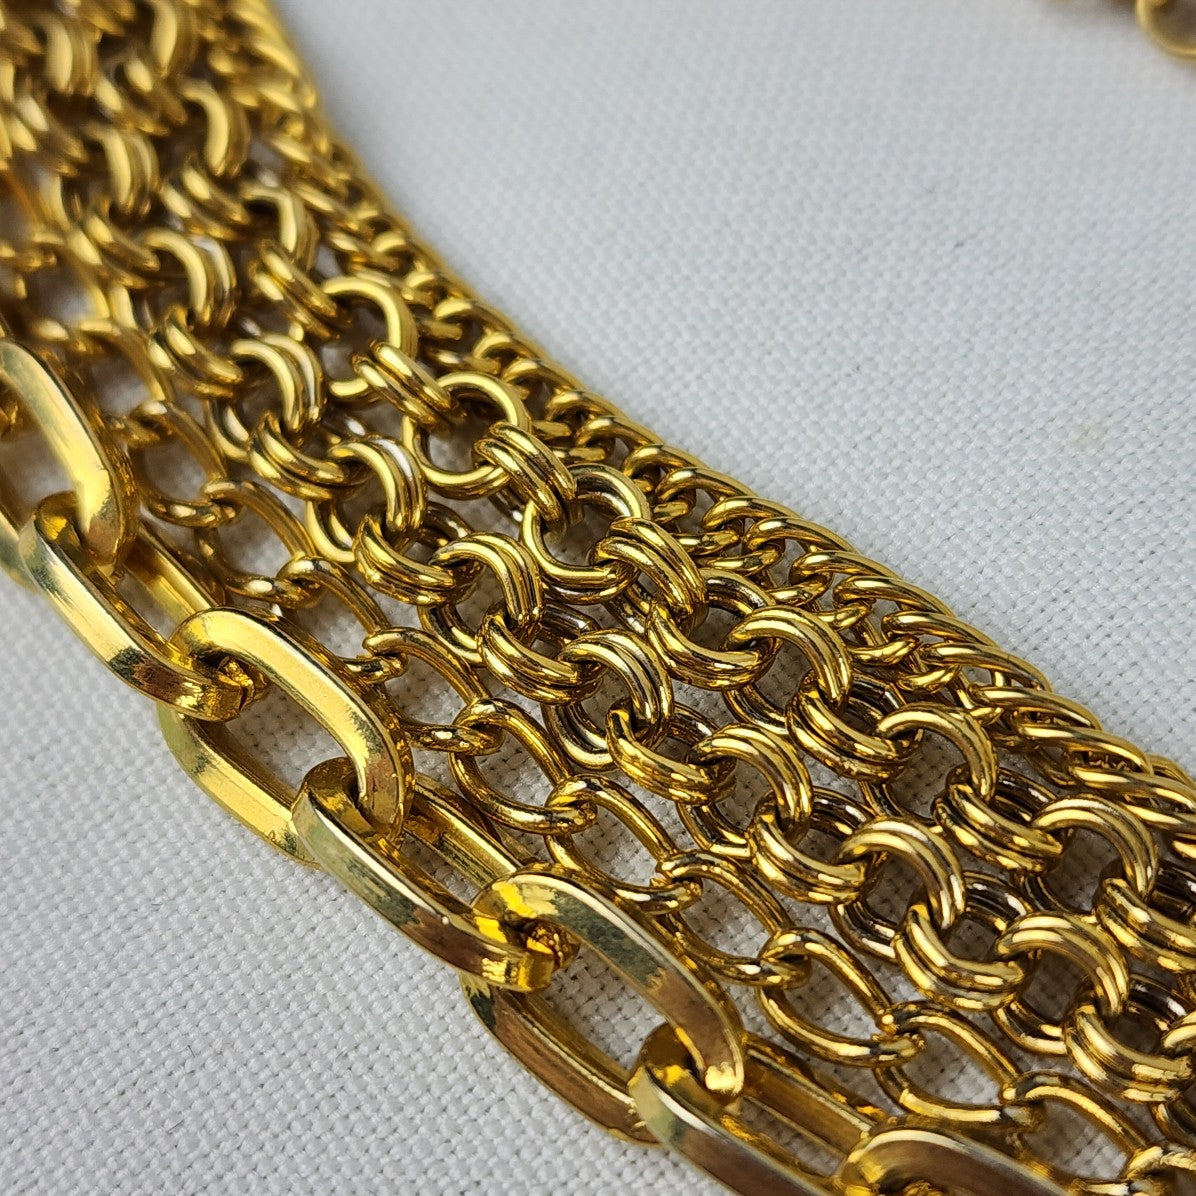 Vintage Gold Tone Layered Chain Necklace